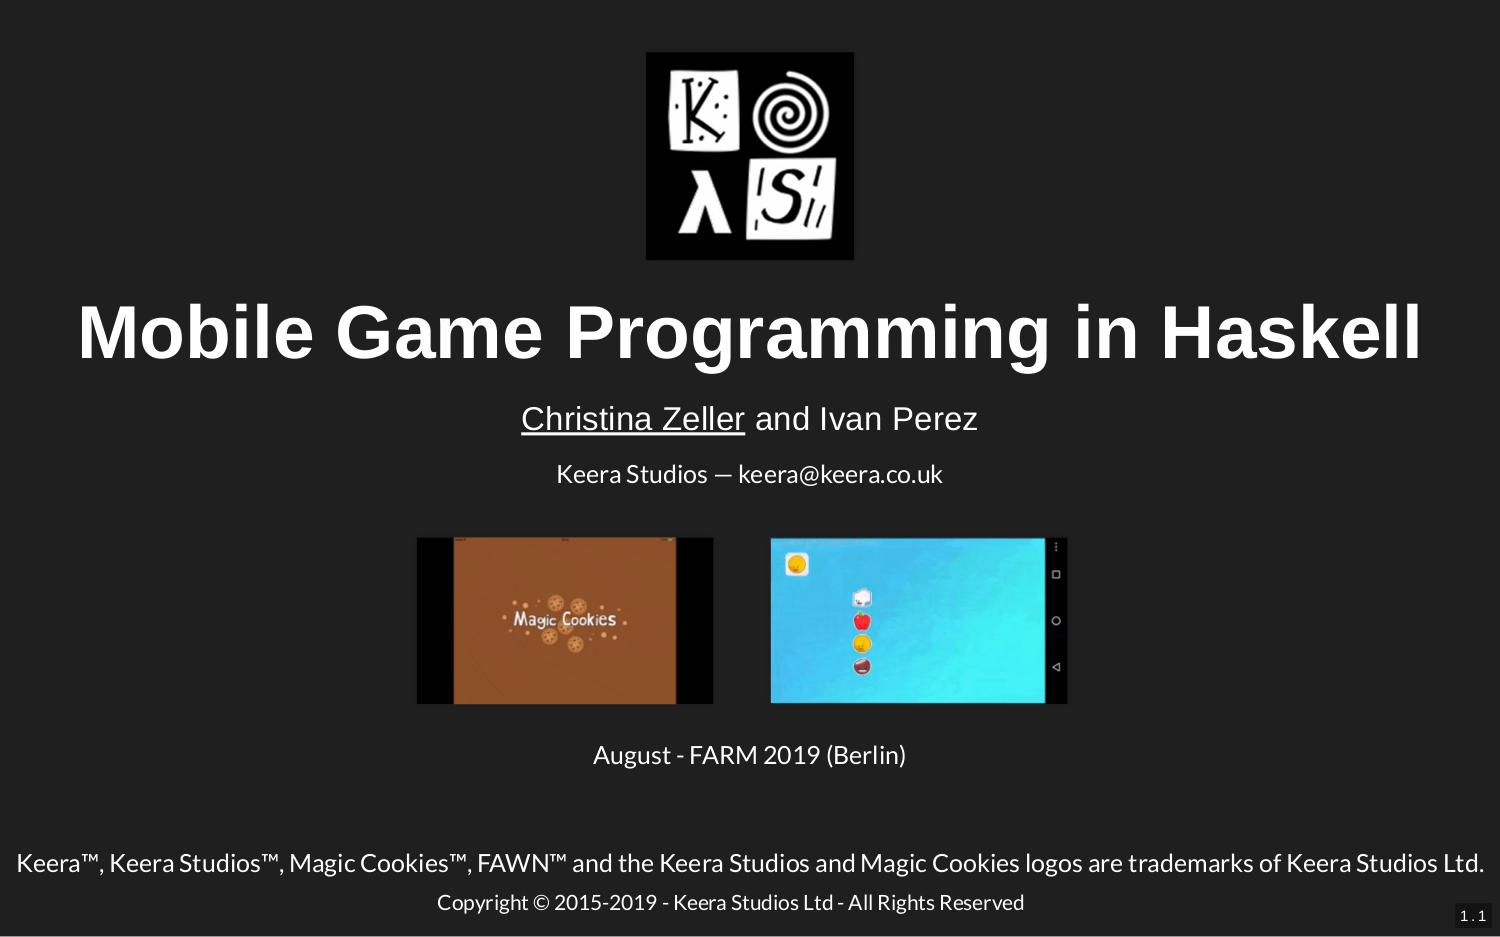 Mobile Game Programming in Haskell - FARM 2019 [Talk]